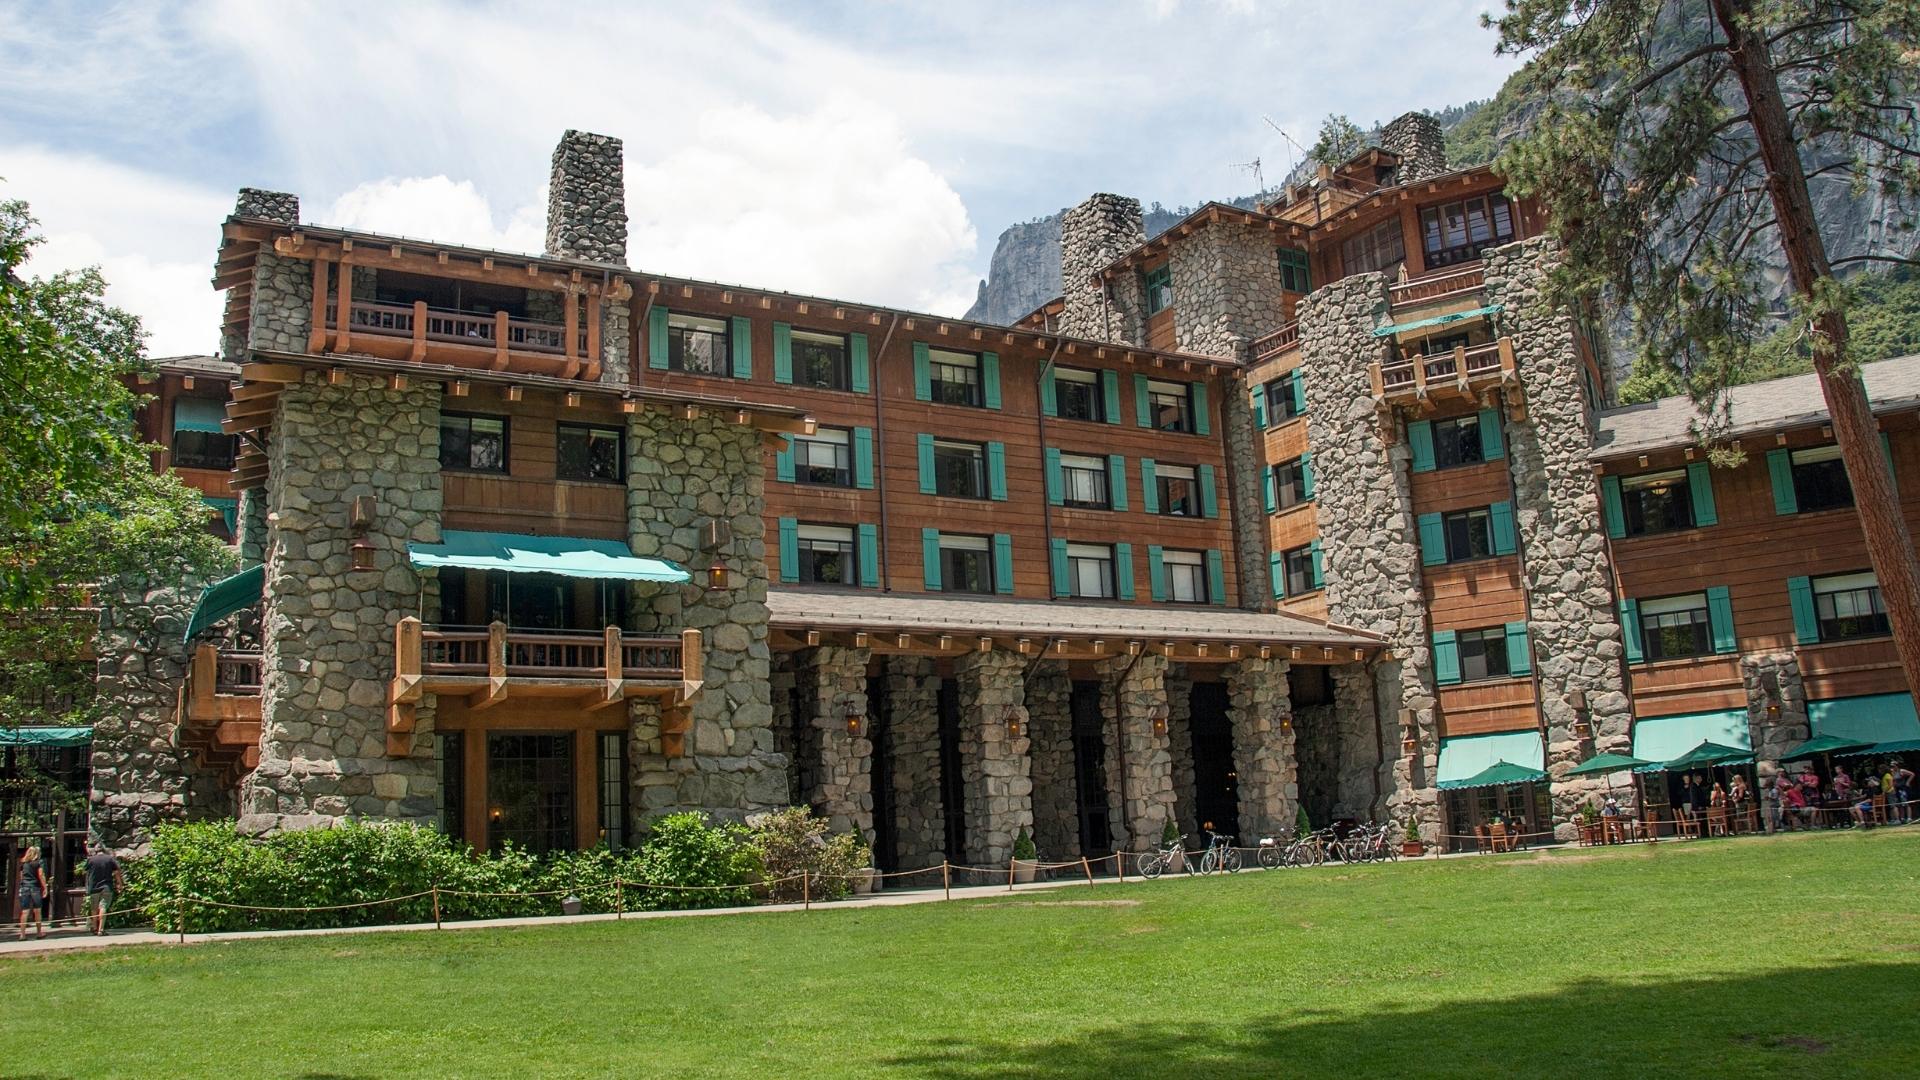 Even when camping in Yosemite in your RV, a trip to the Ahwahnee Hotel is worth it!